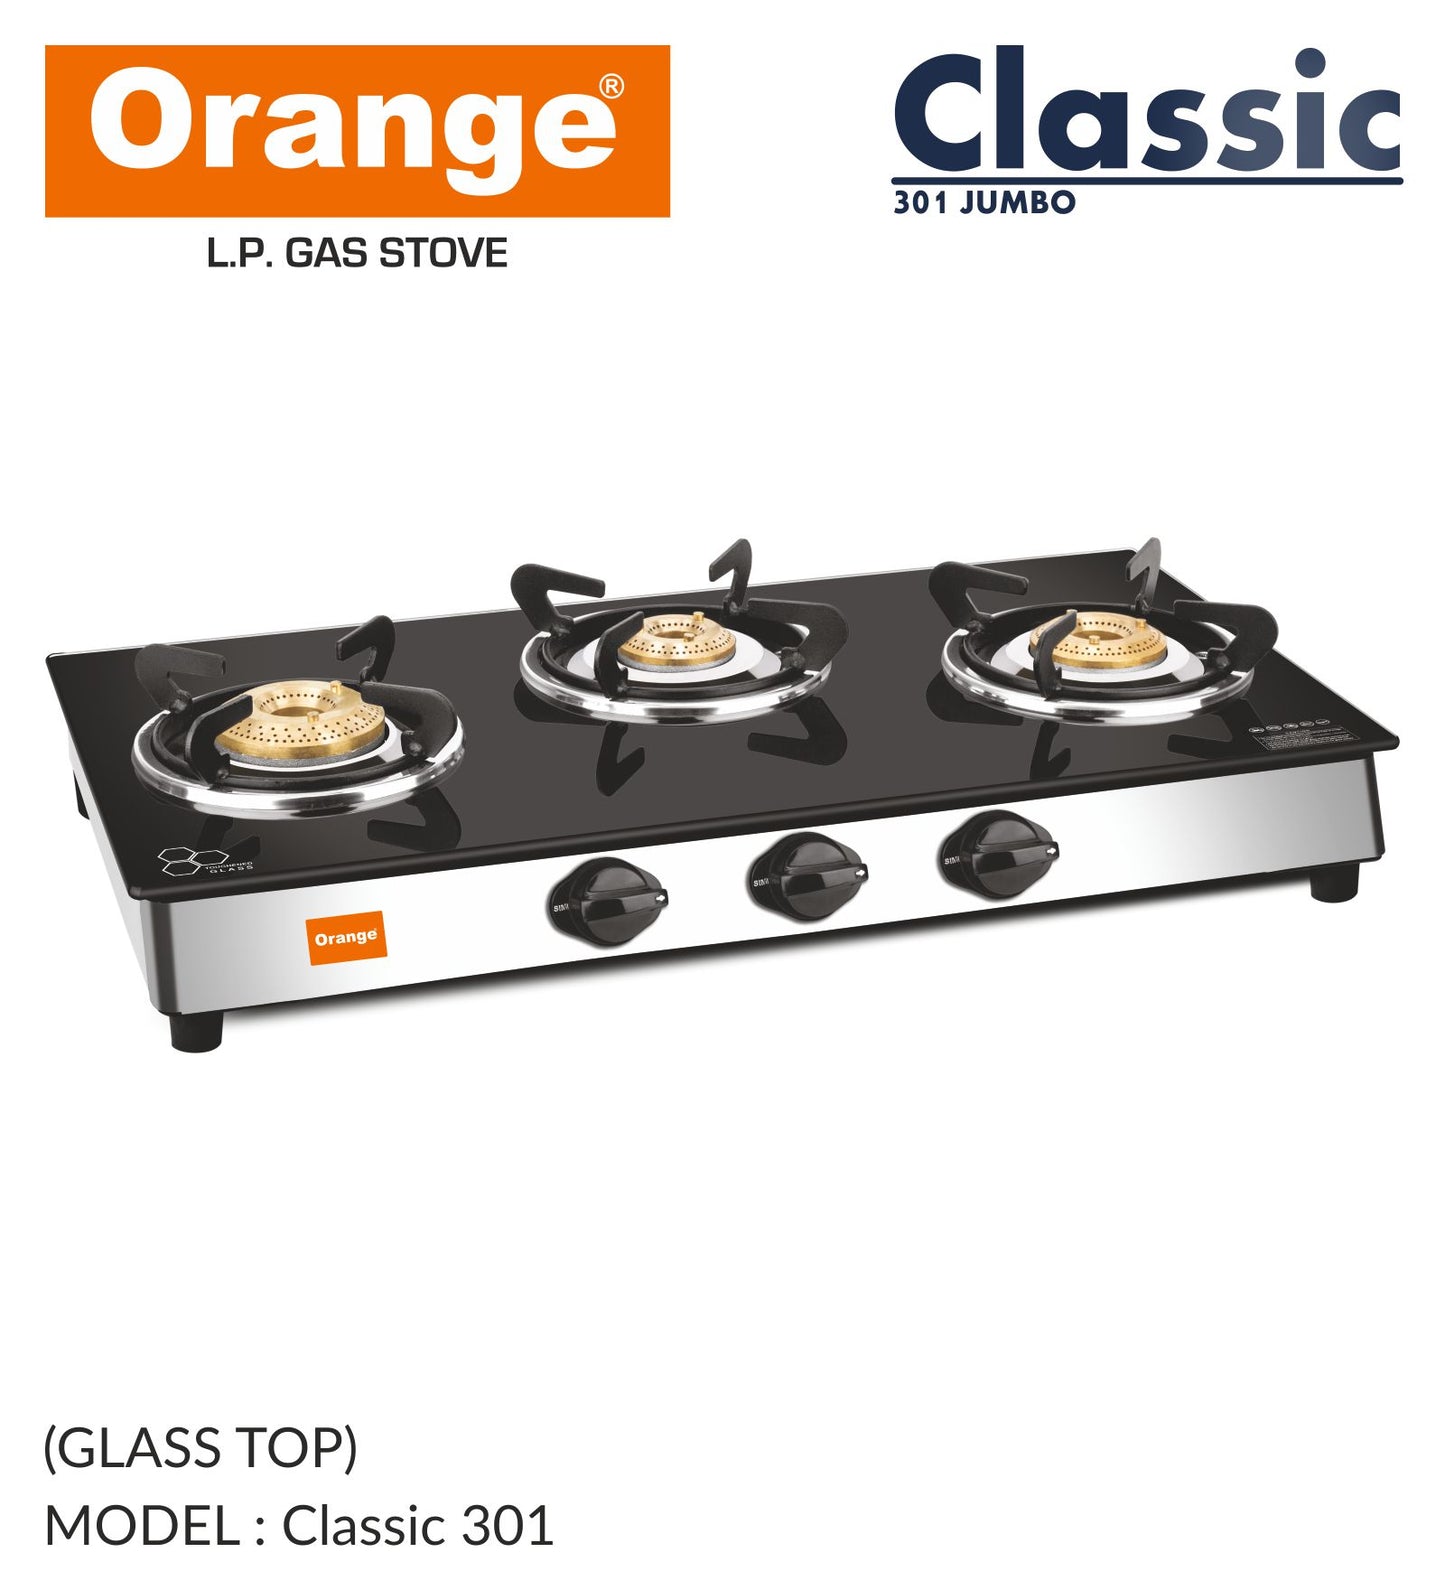 Orange Classic 3 Burner With Glass Top Gas Stove Black Stainless Steel